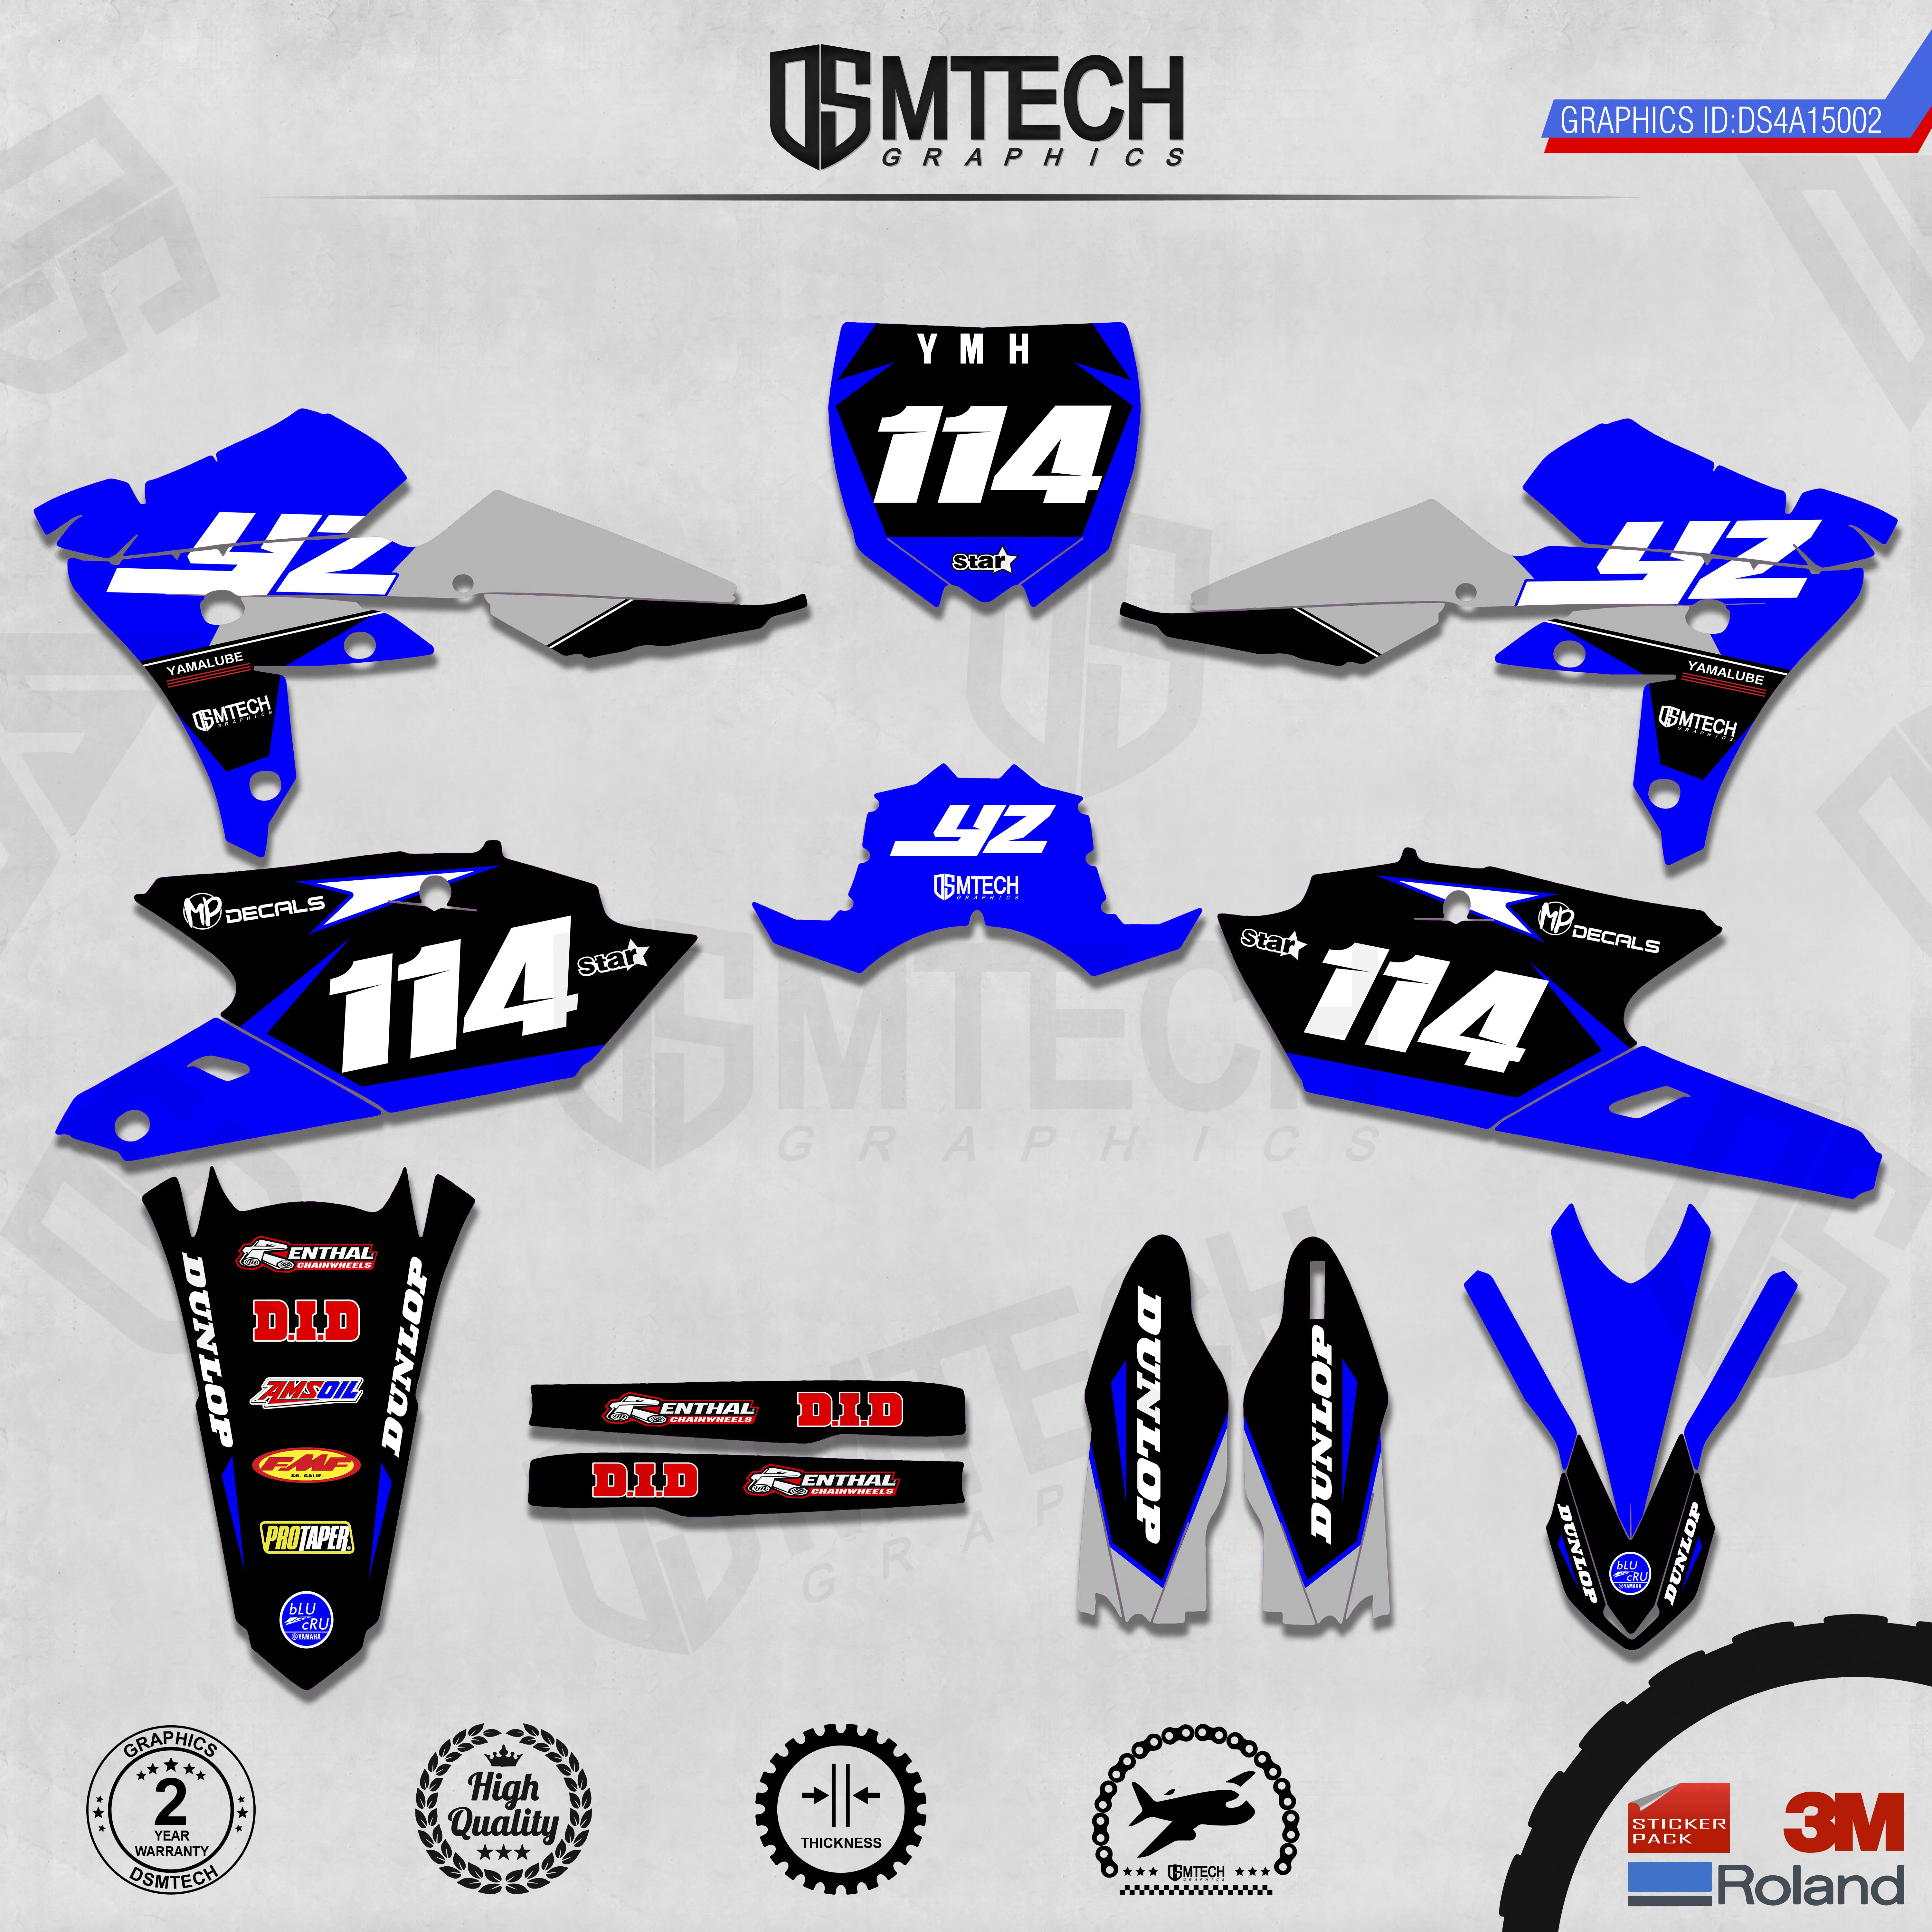 DSMTECH Customized Team Graphics Backgrounds Decals 3M Custom Stickers For 2016-2018 WR450F 2015-2018 YZ450FX  002